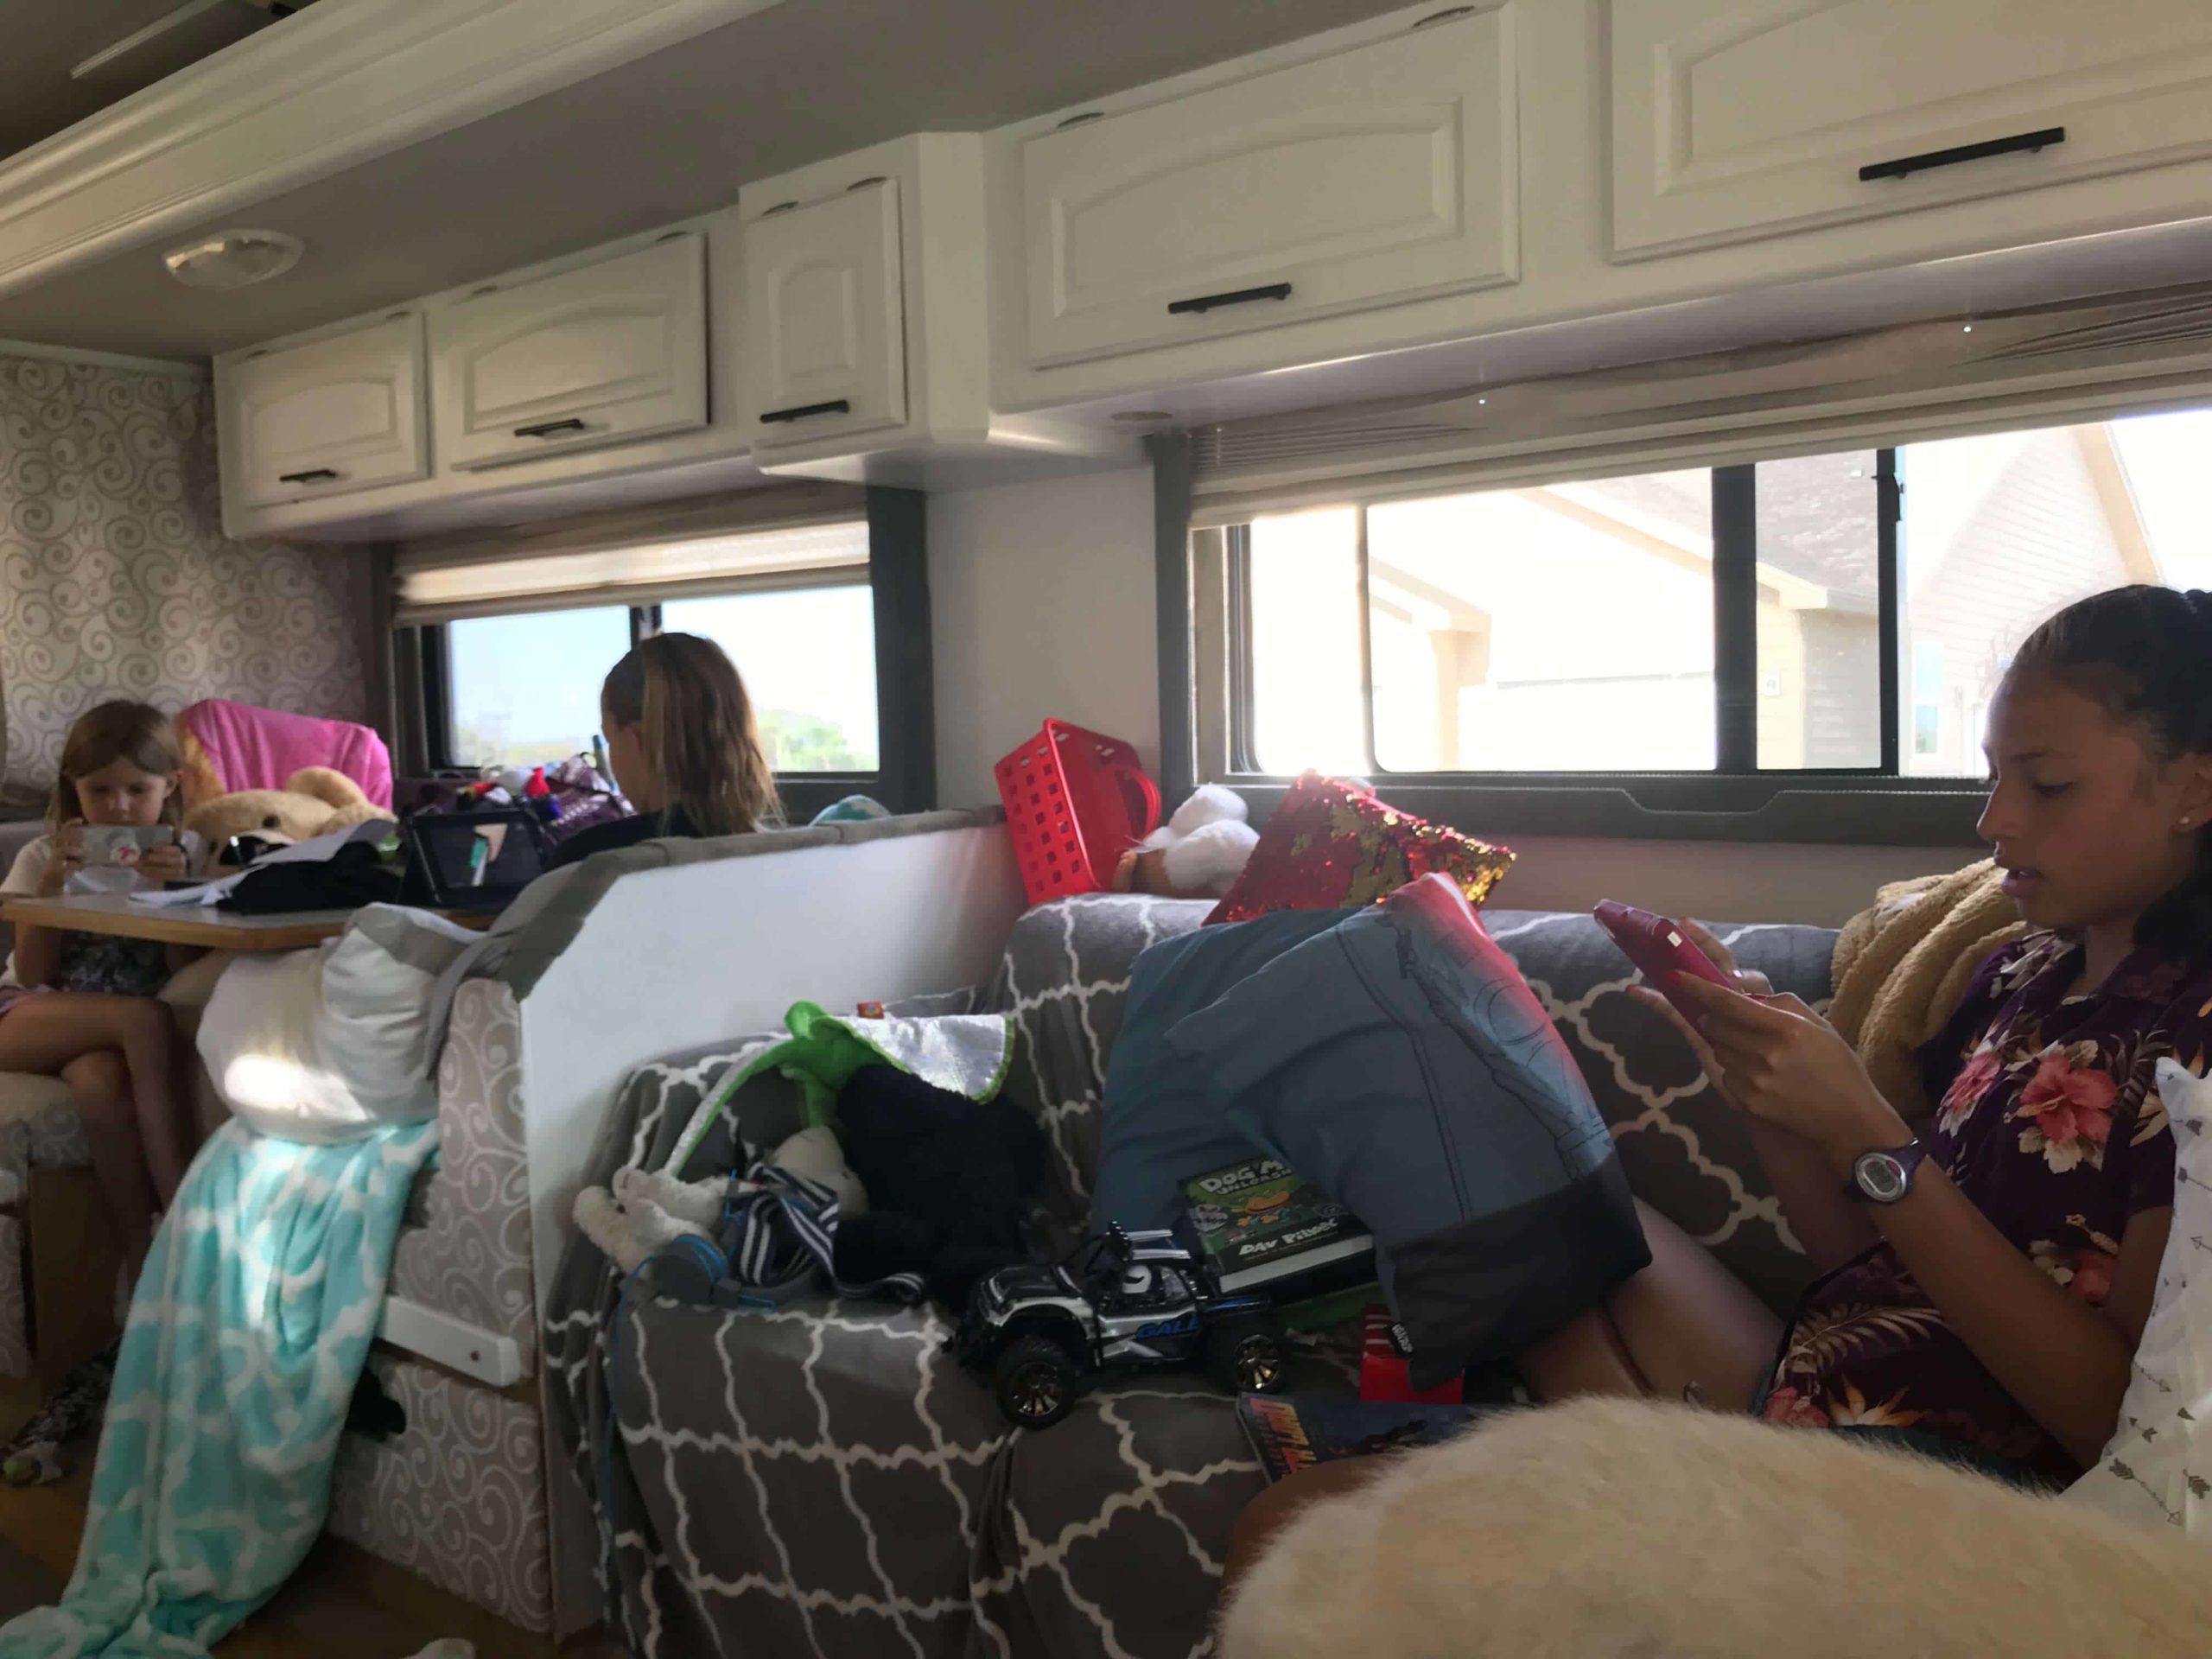 RV life with Kids